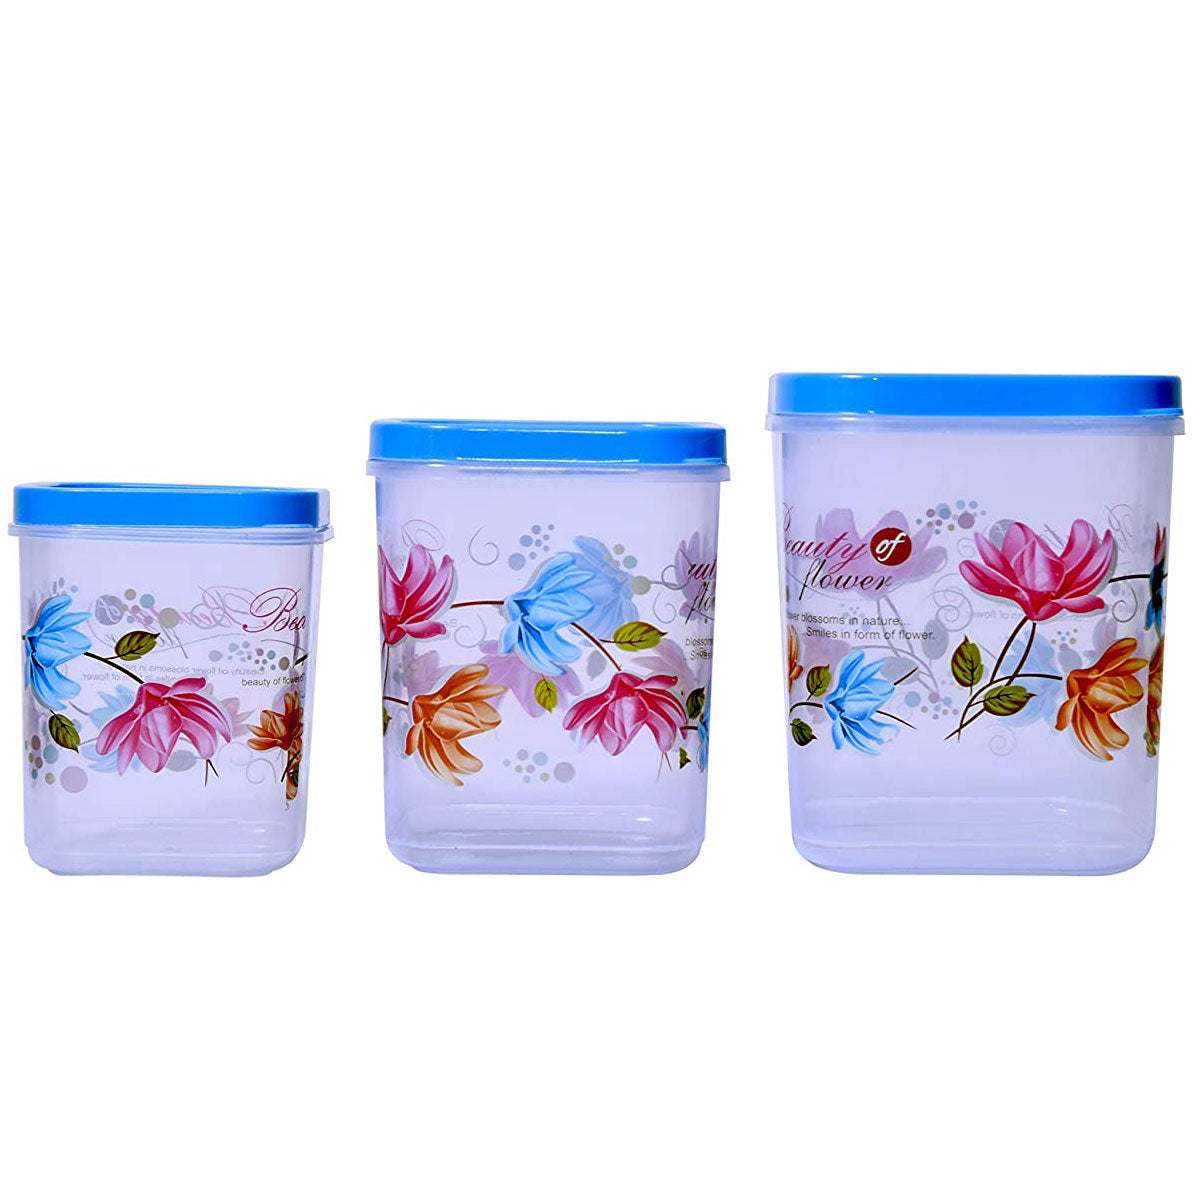 Kitchen Storage Containers Transparent 1000 ml, 2000 ml, 3000 ml Set of 3 Blue